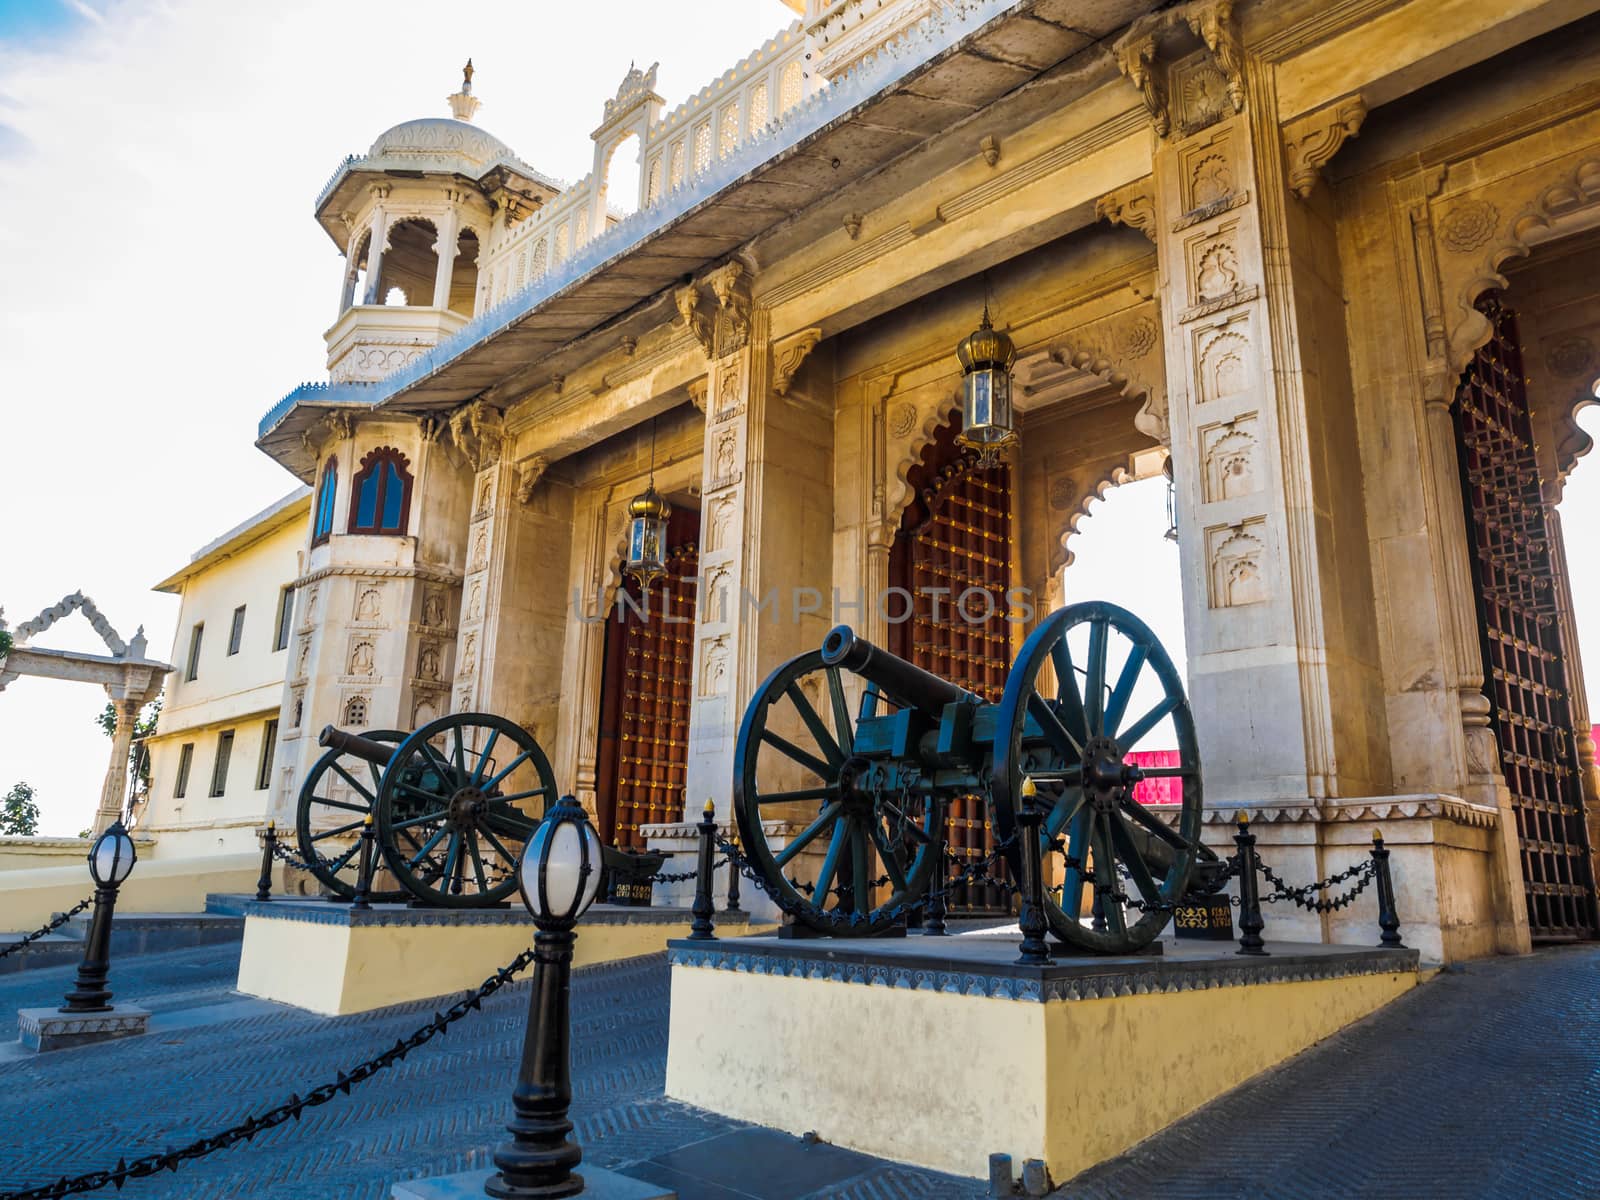 Gate of City Palace in Udaipur, Rajasthan, India